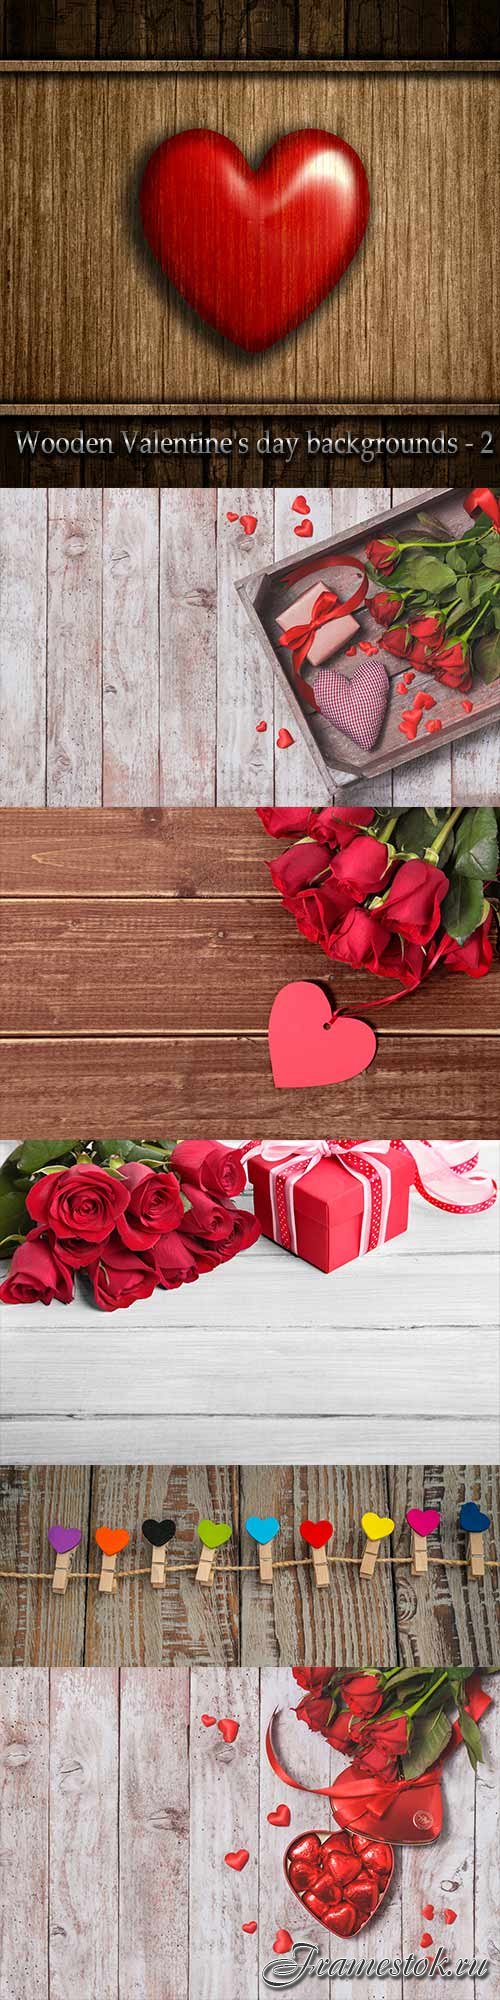 Wooden Valentine's day backgrounds - 2